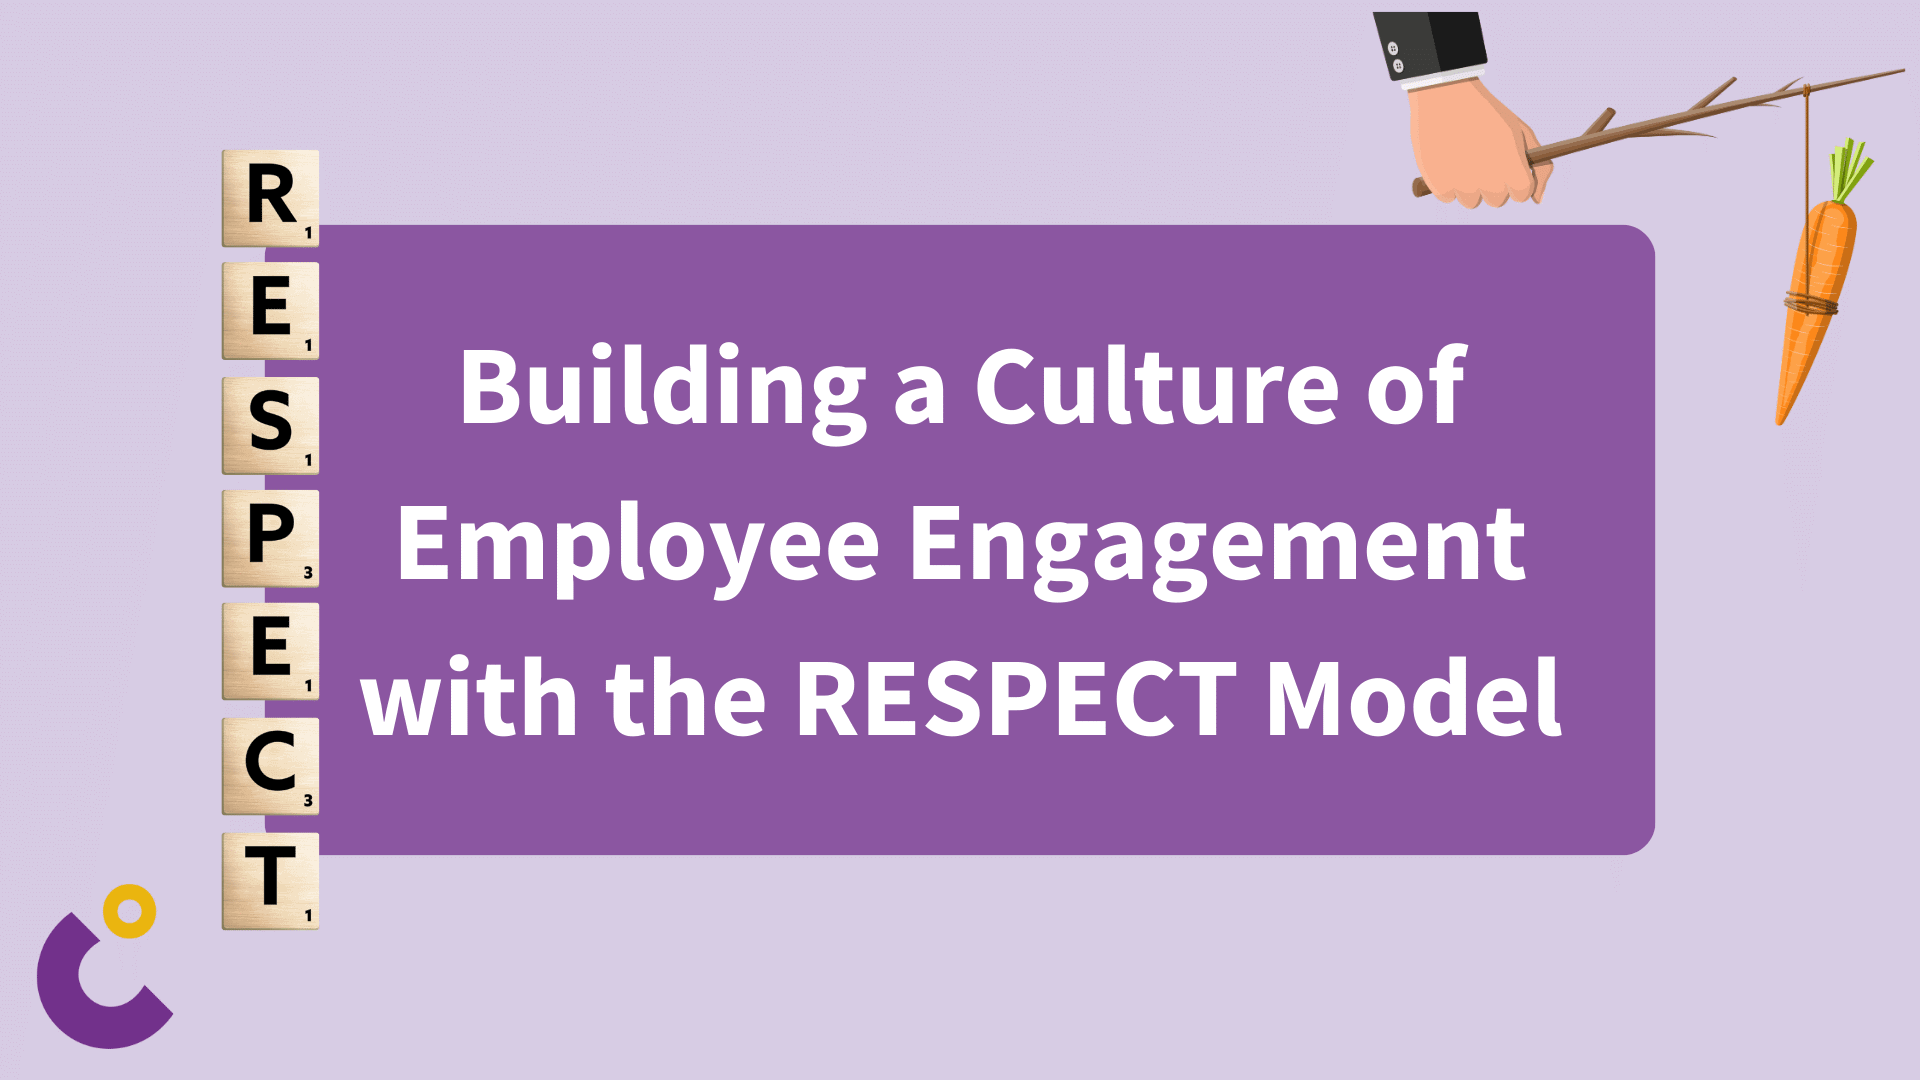 Building a Culture of Employee Engagement with the RESPECT Model